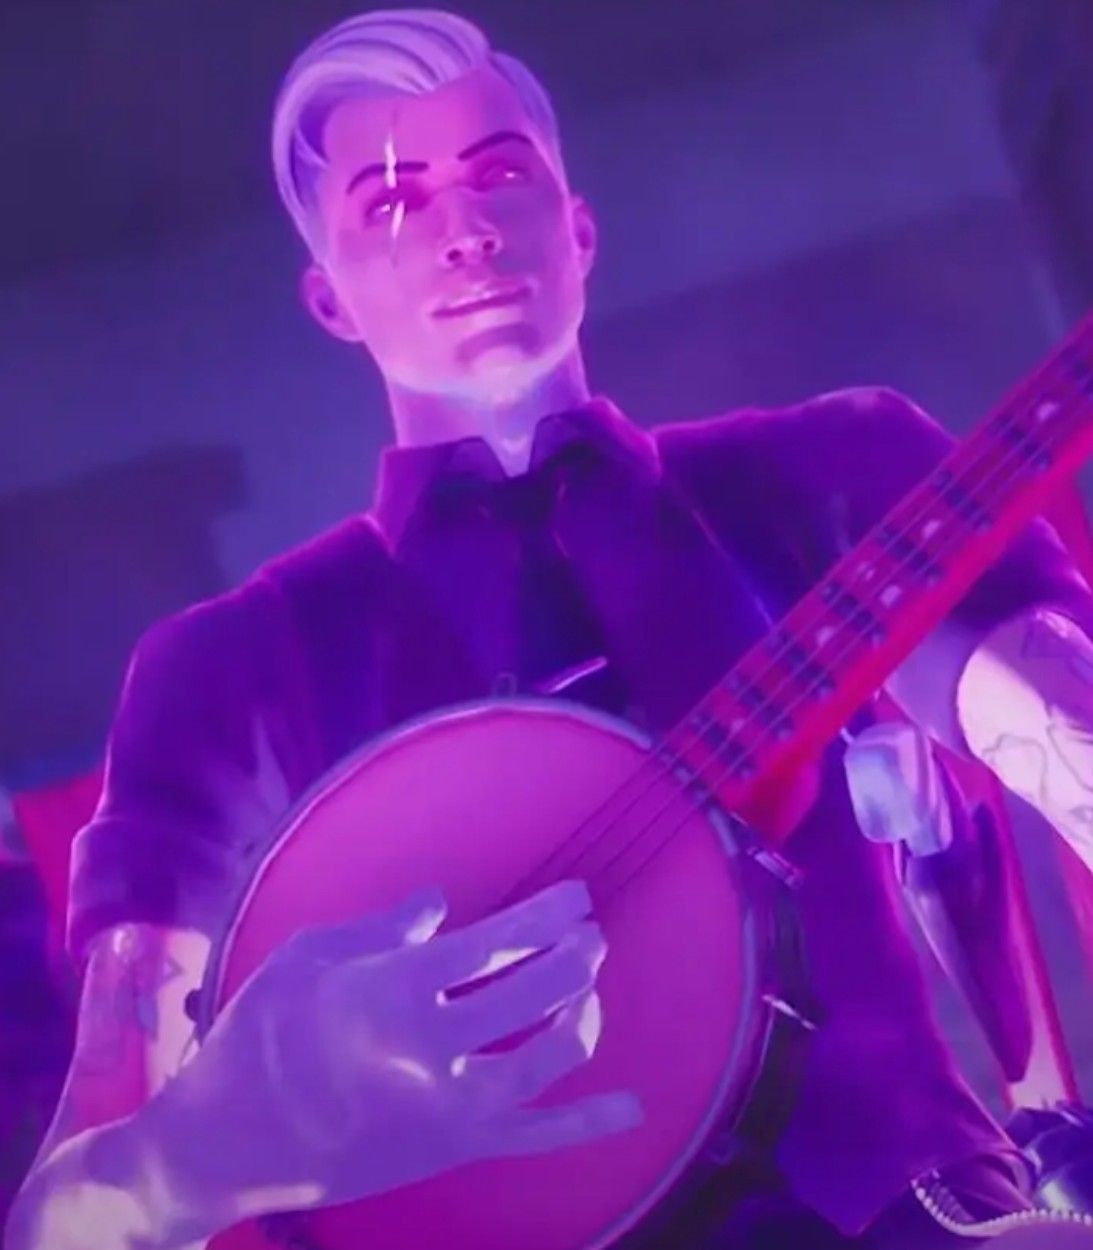 Shadow Midas plays banjo during the Fortnitemares event in Fortnite